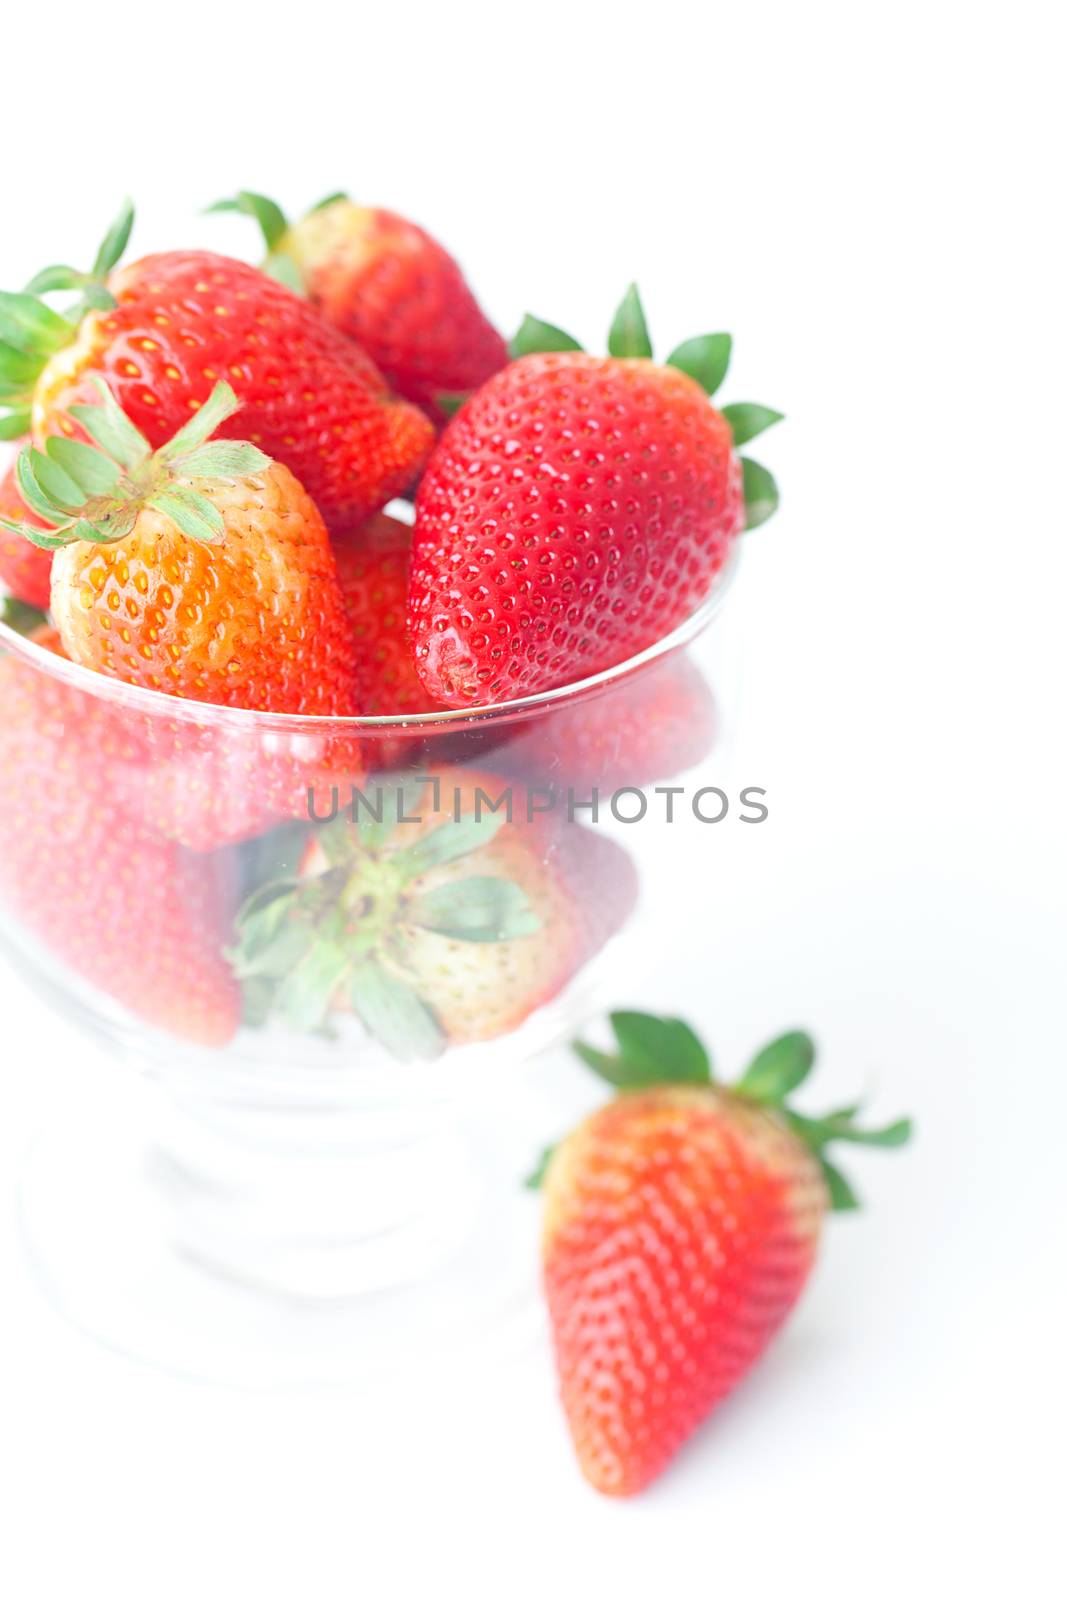 big red strawberries in a glass bowl